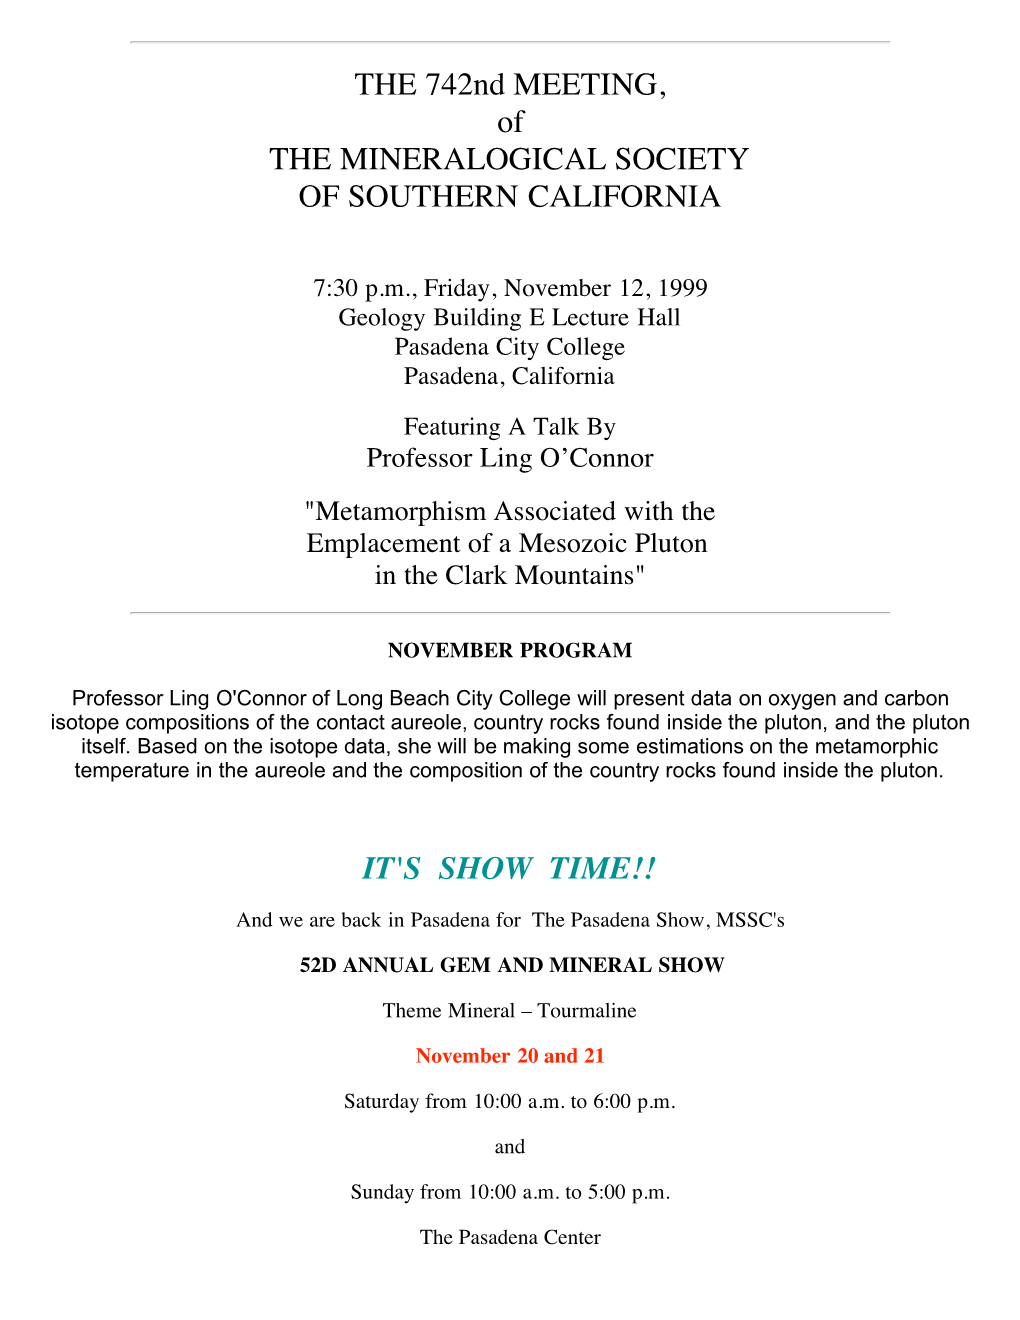 THE 742Nd MEETING, of the MINERALOGICAL SOCIETY of SOUTHERN CALIFORNIA